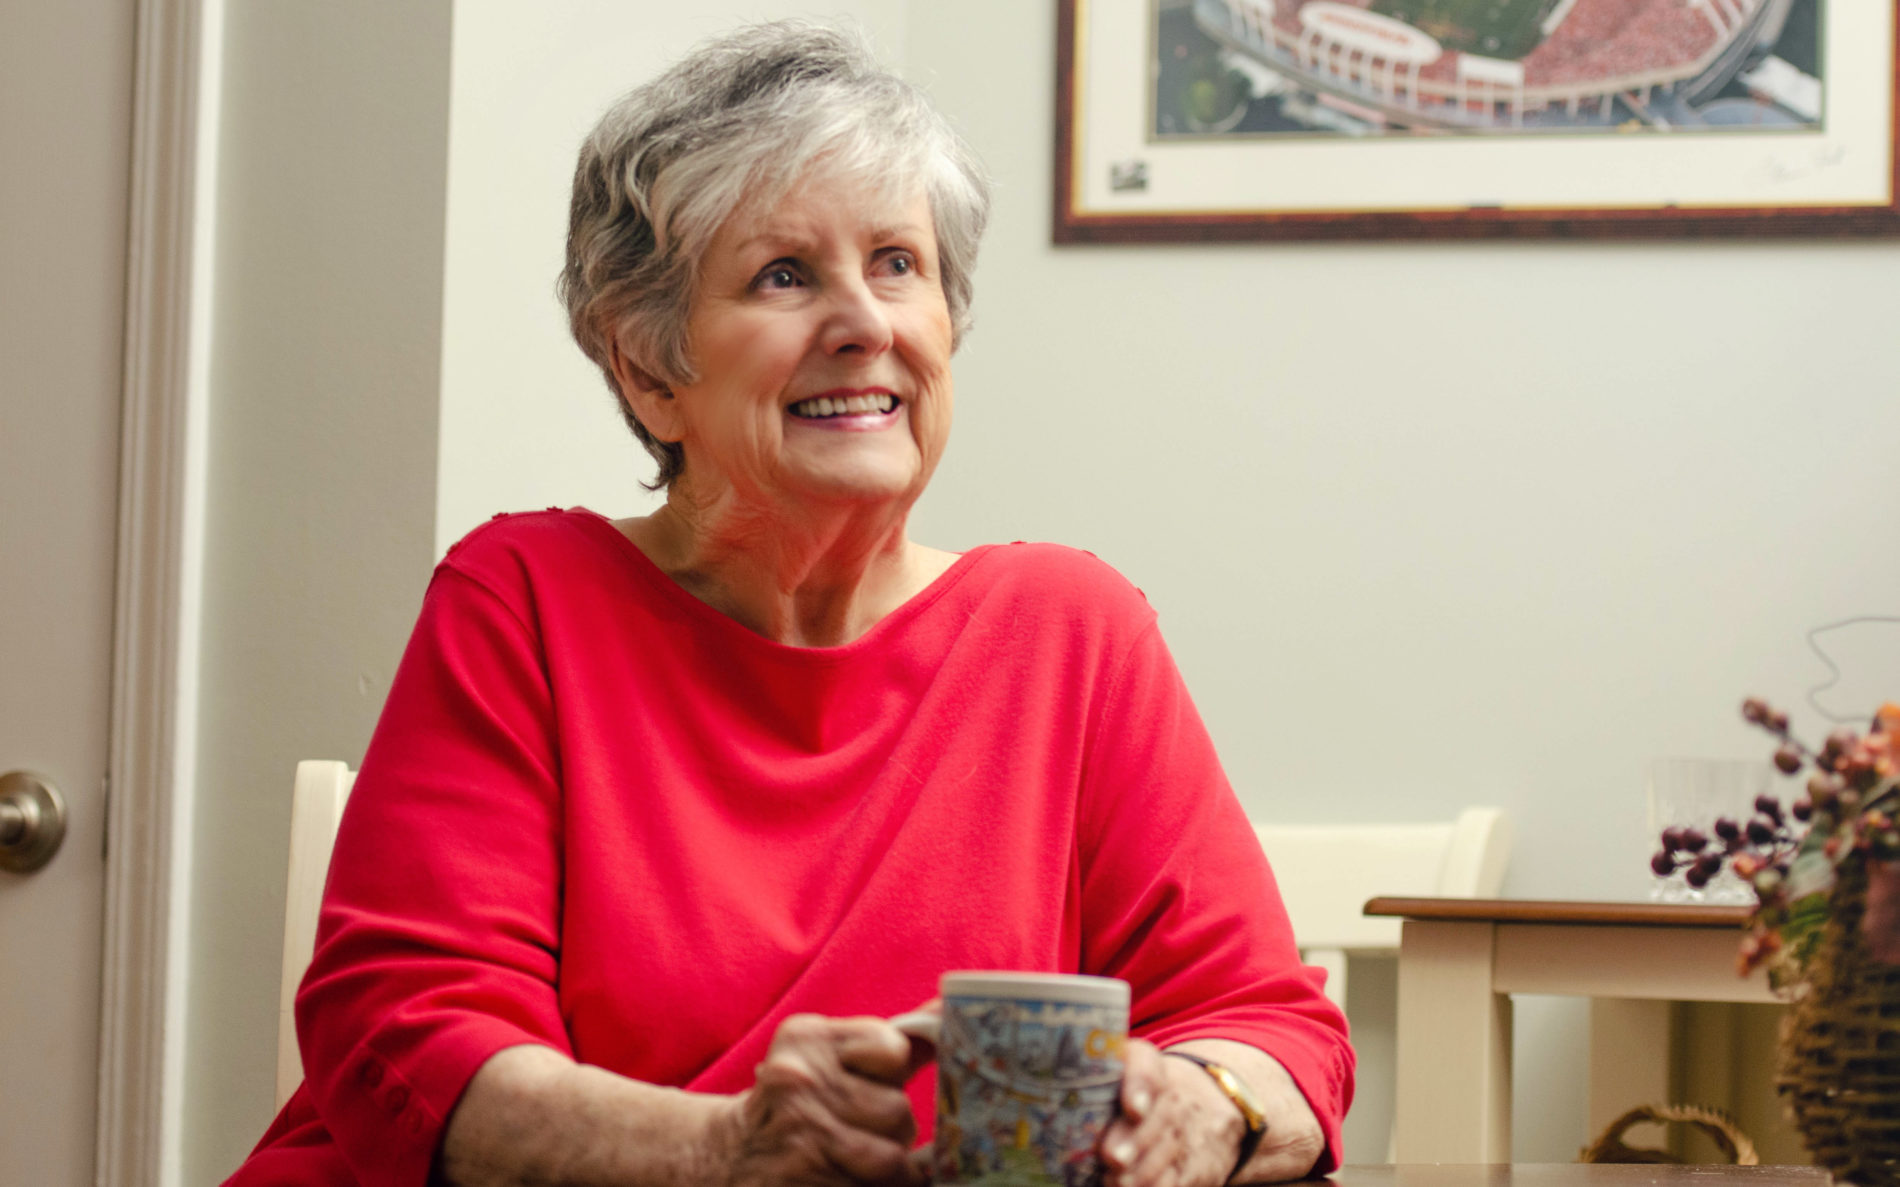 A woman resident in pink, enjoying a cup of coffee in her room as she smiles up at the camera